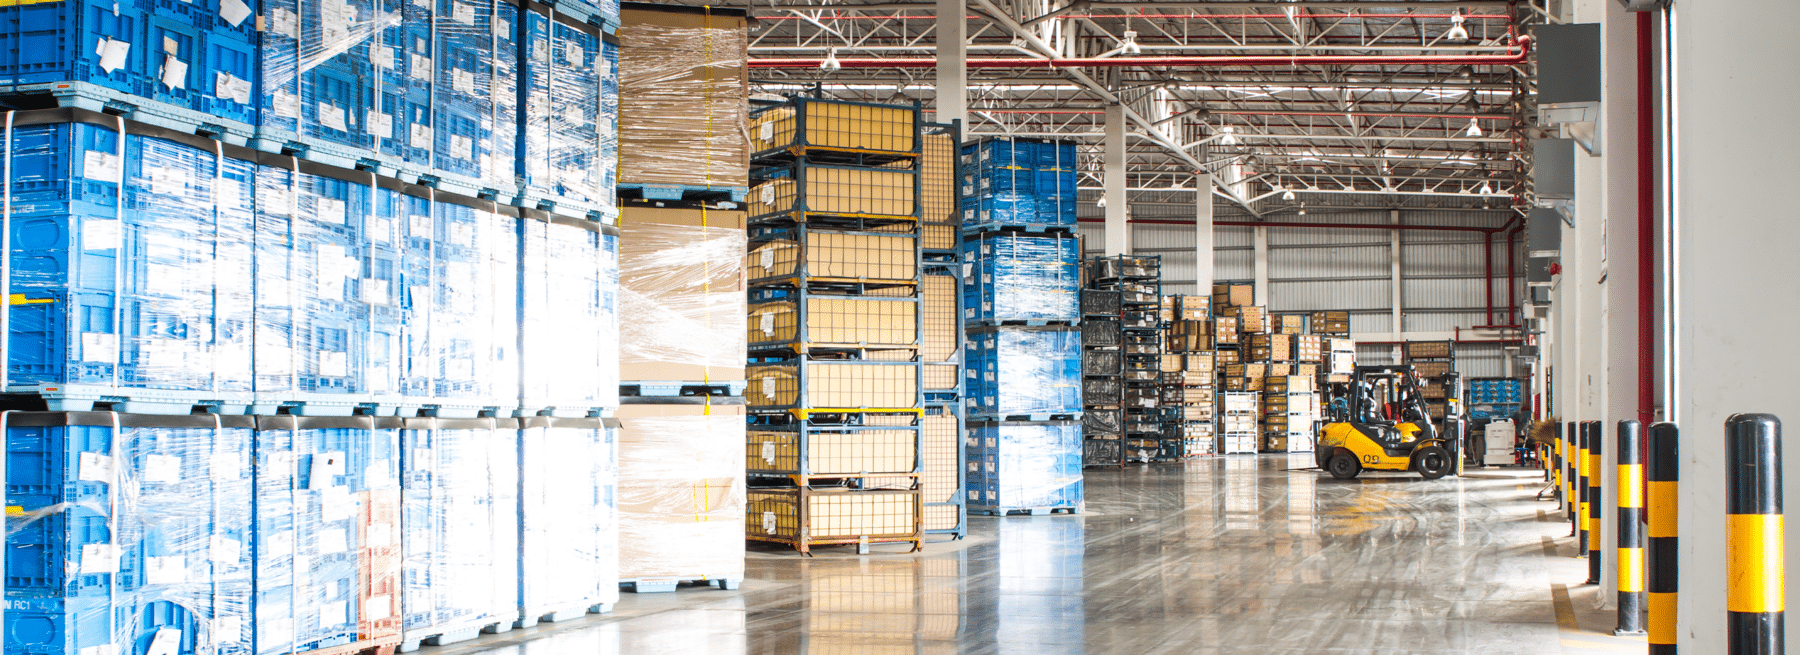 Best Practices to Prevent Damage to Warehouses